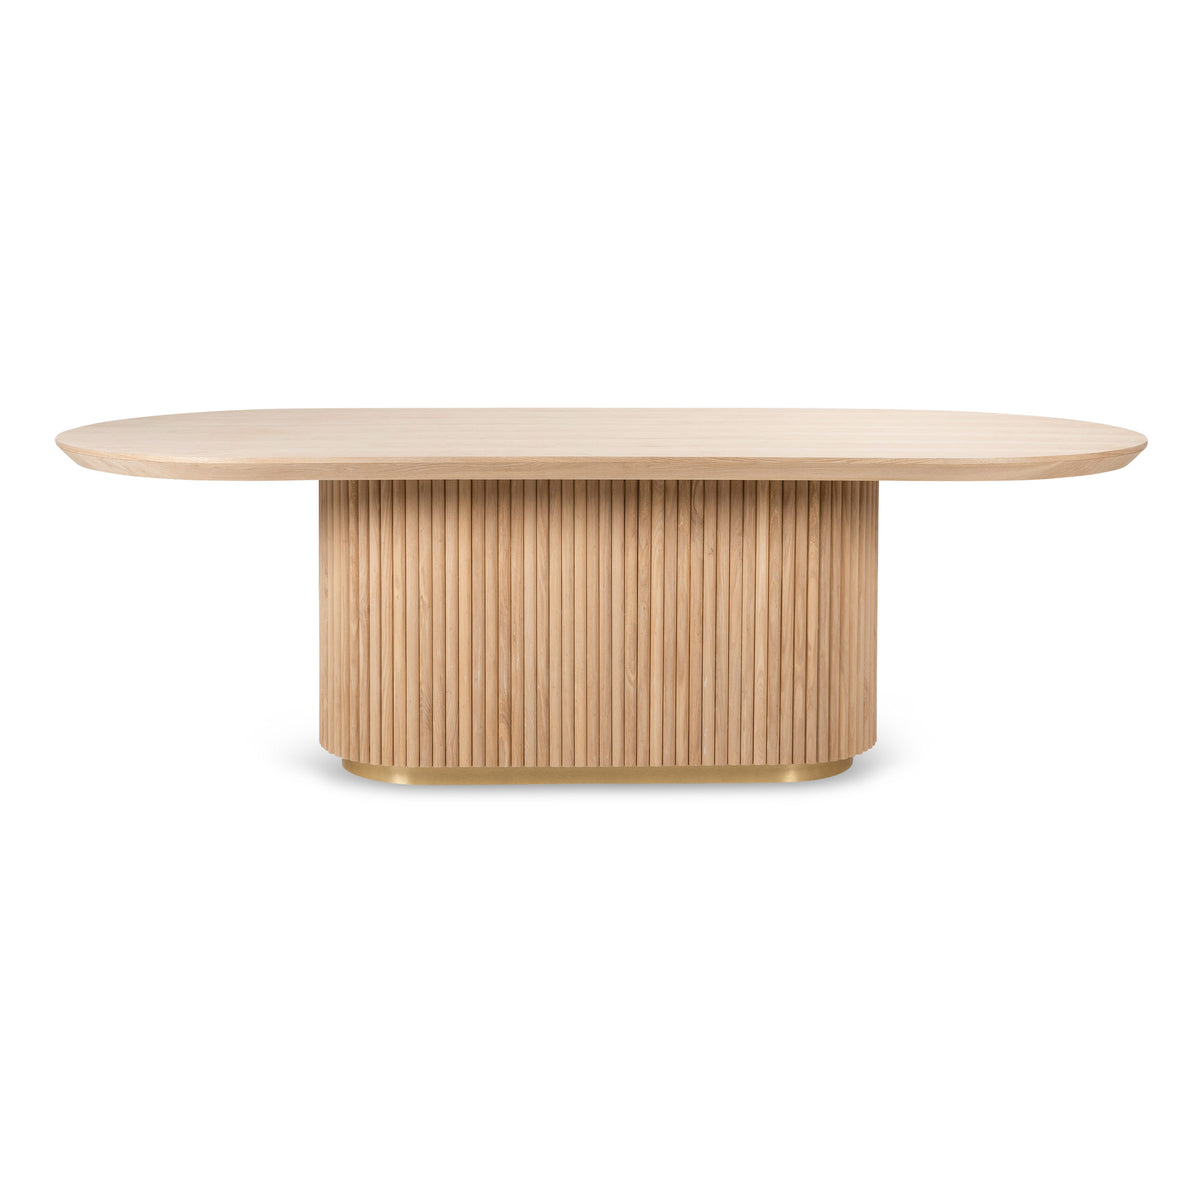 Ubud Oval Dining Table in Ash Wood